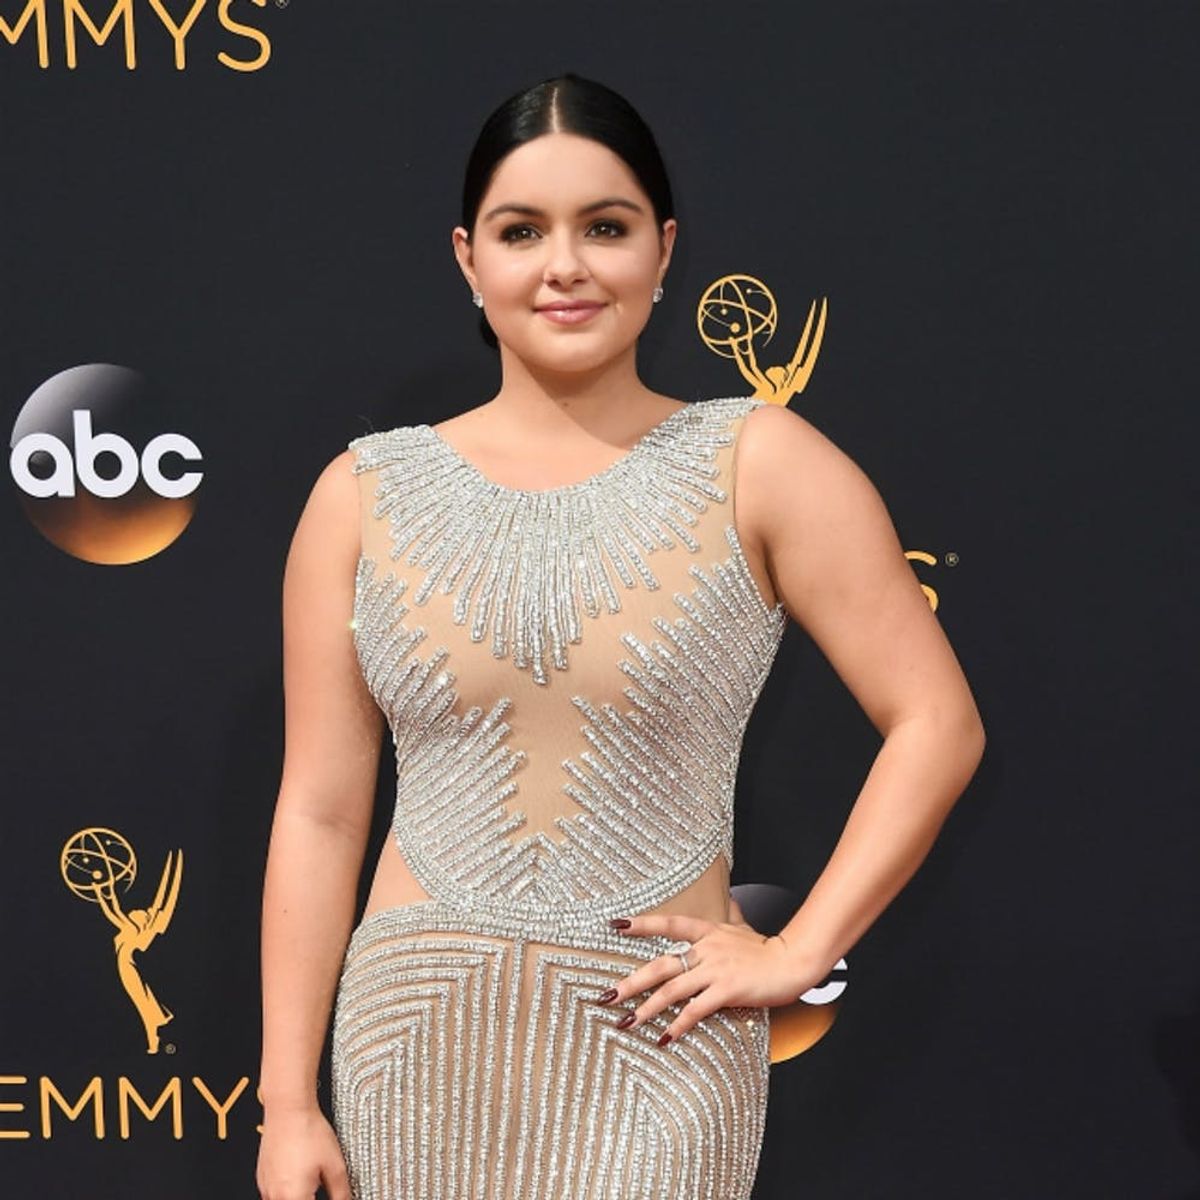 Ariel Winter Reveals Why She Isn’t Starting College This Year